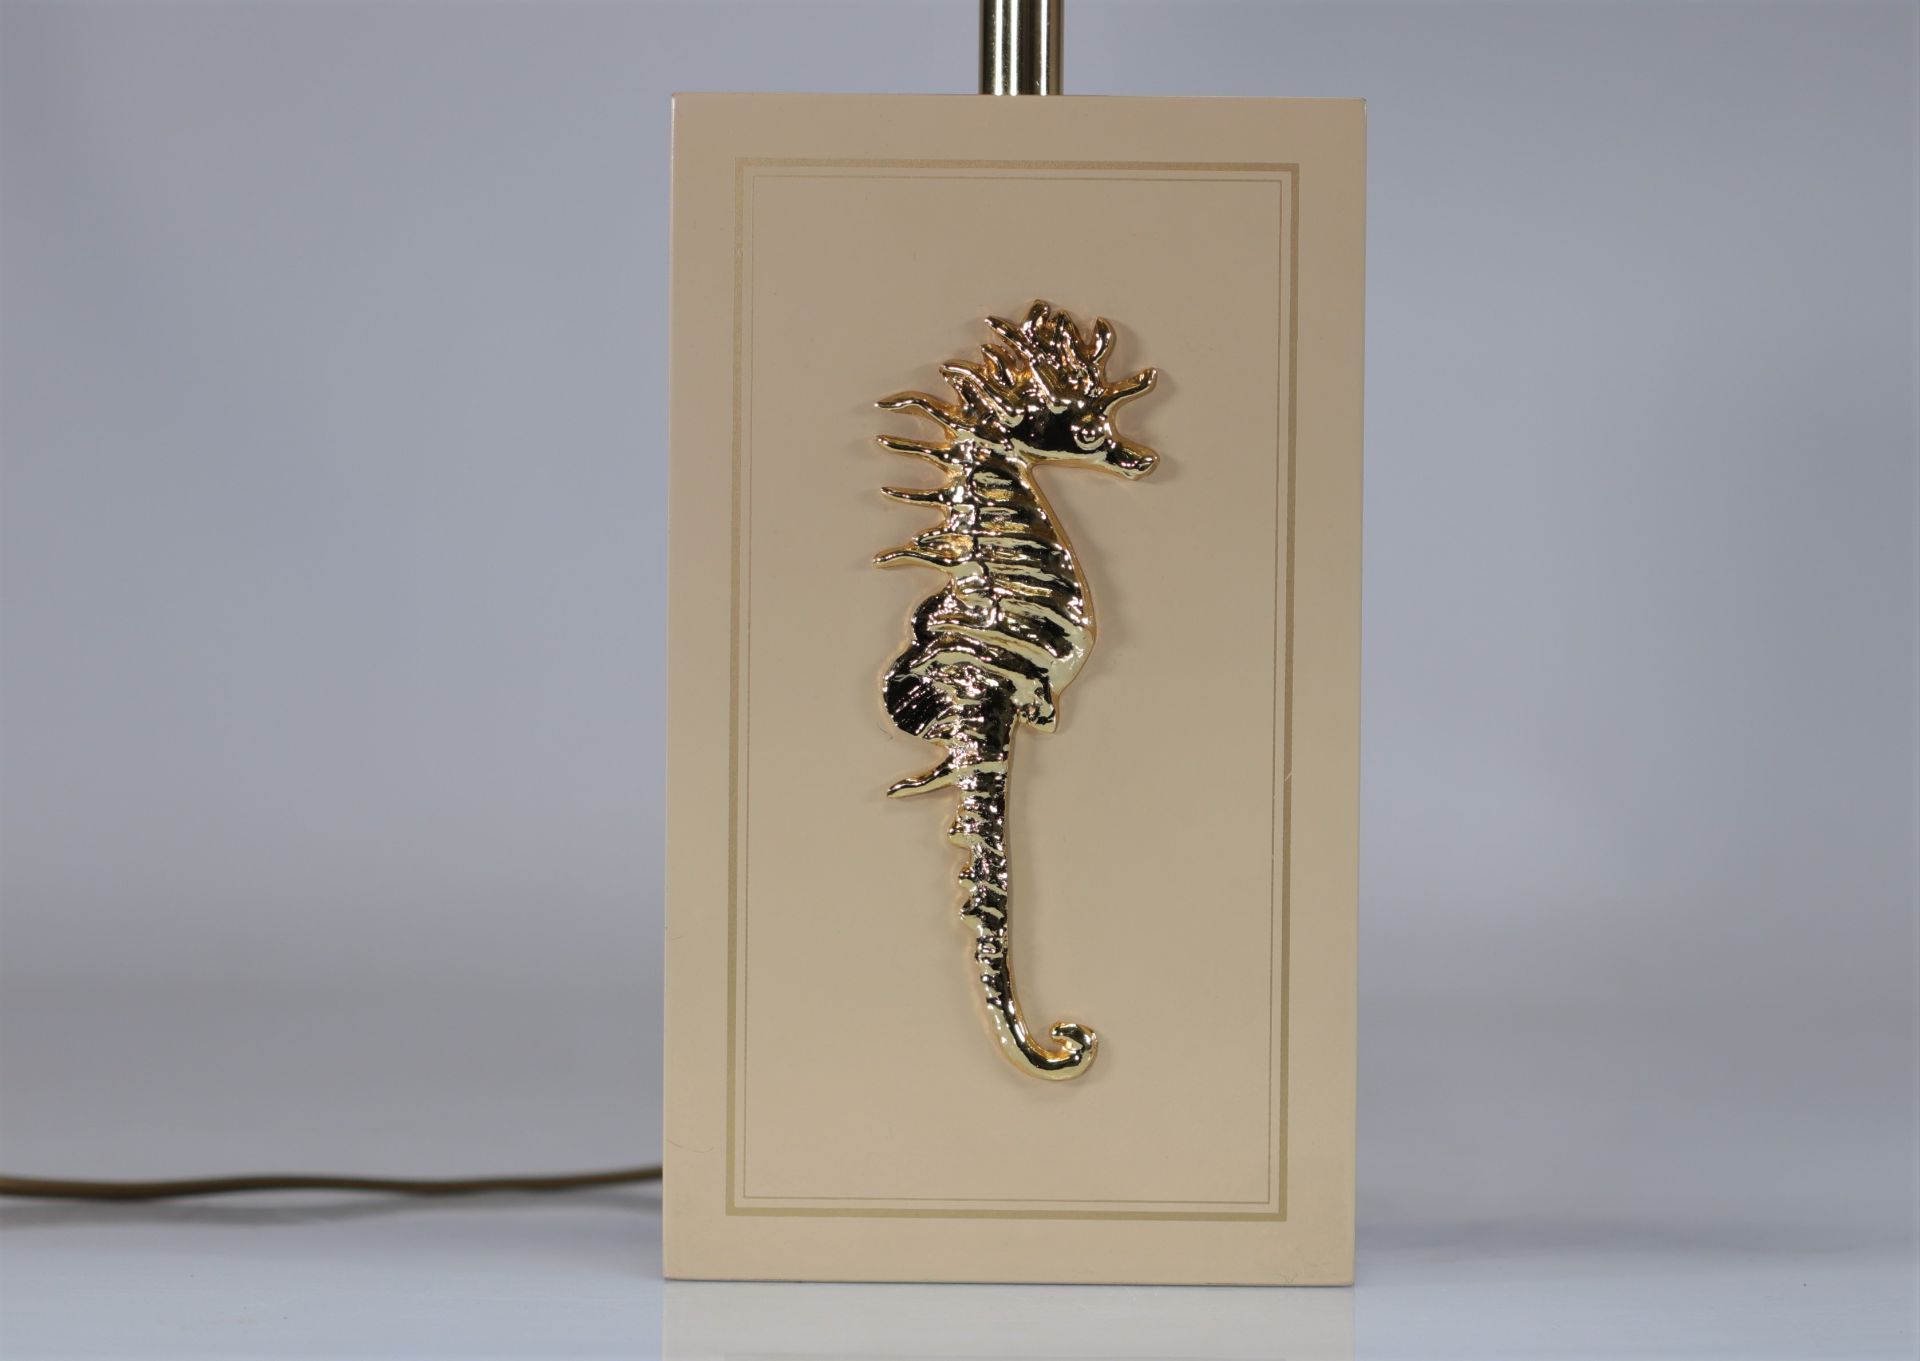 (2) Pair of lamps with lacquered feet decorated with seahorses and waders, 1970s - Image 5 of 5